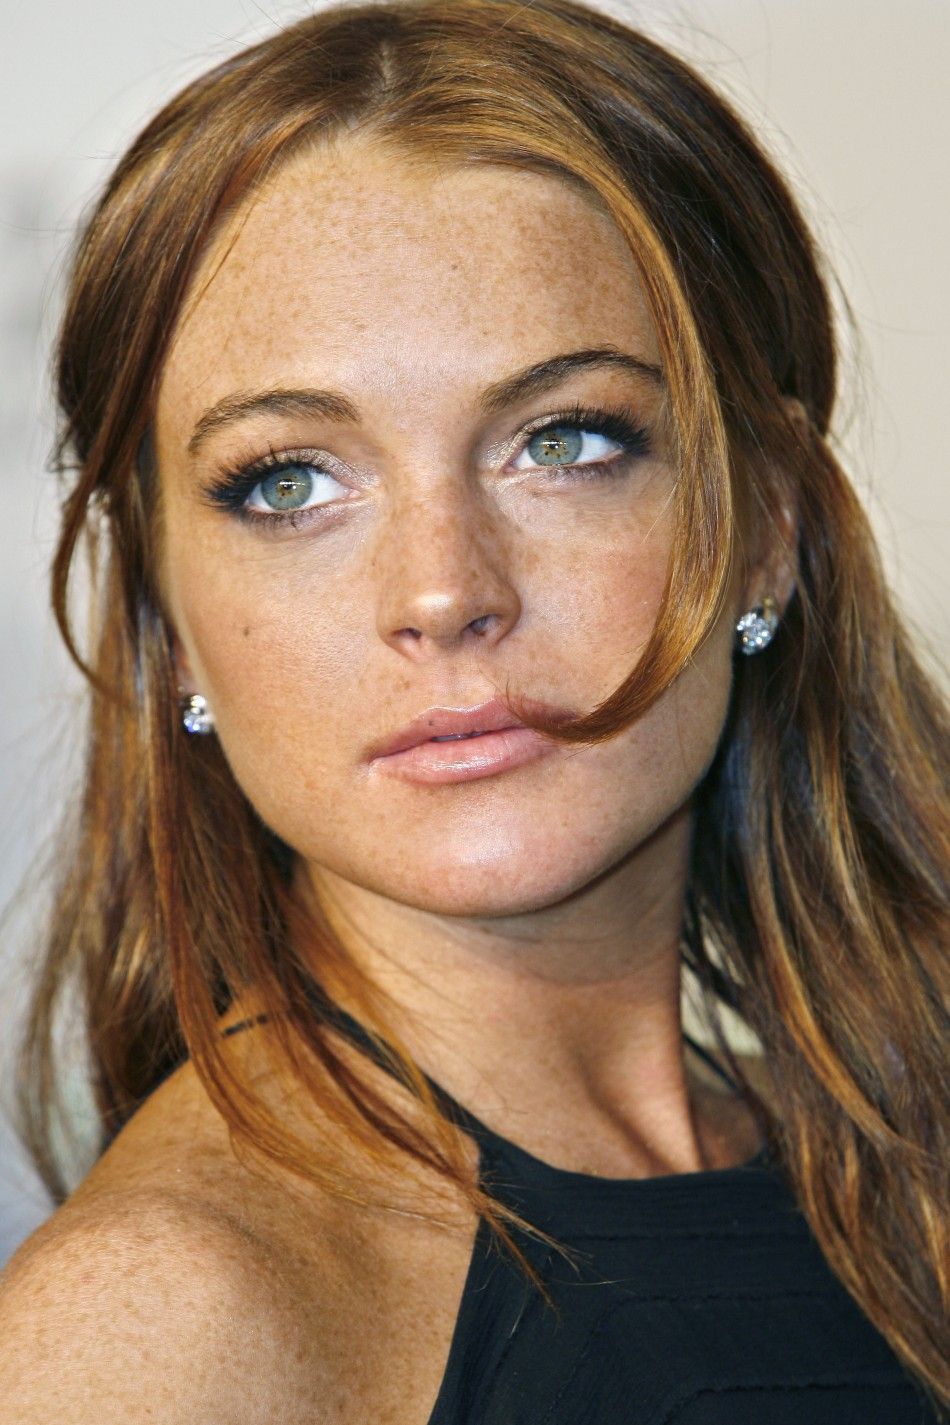 Singer actress Lohan poses for photographers on red carpet at 2006 CFDA Fashion Awards in New York City